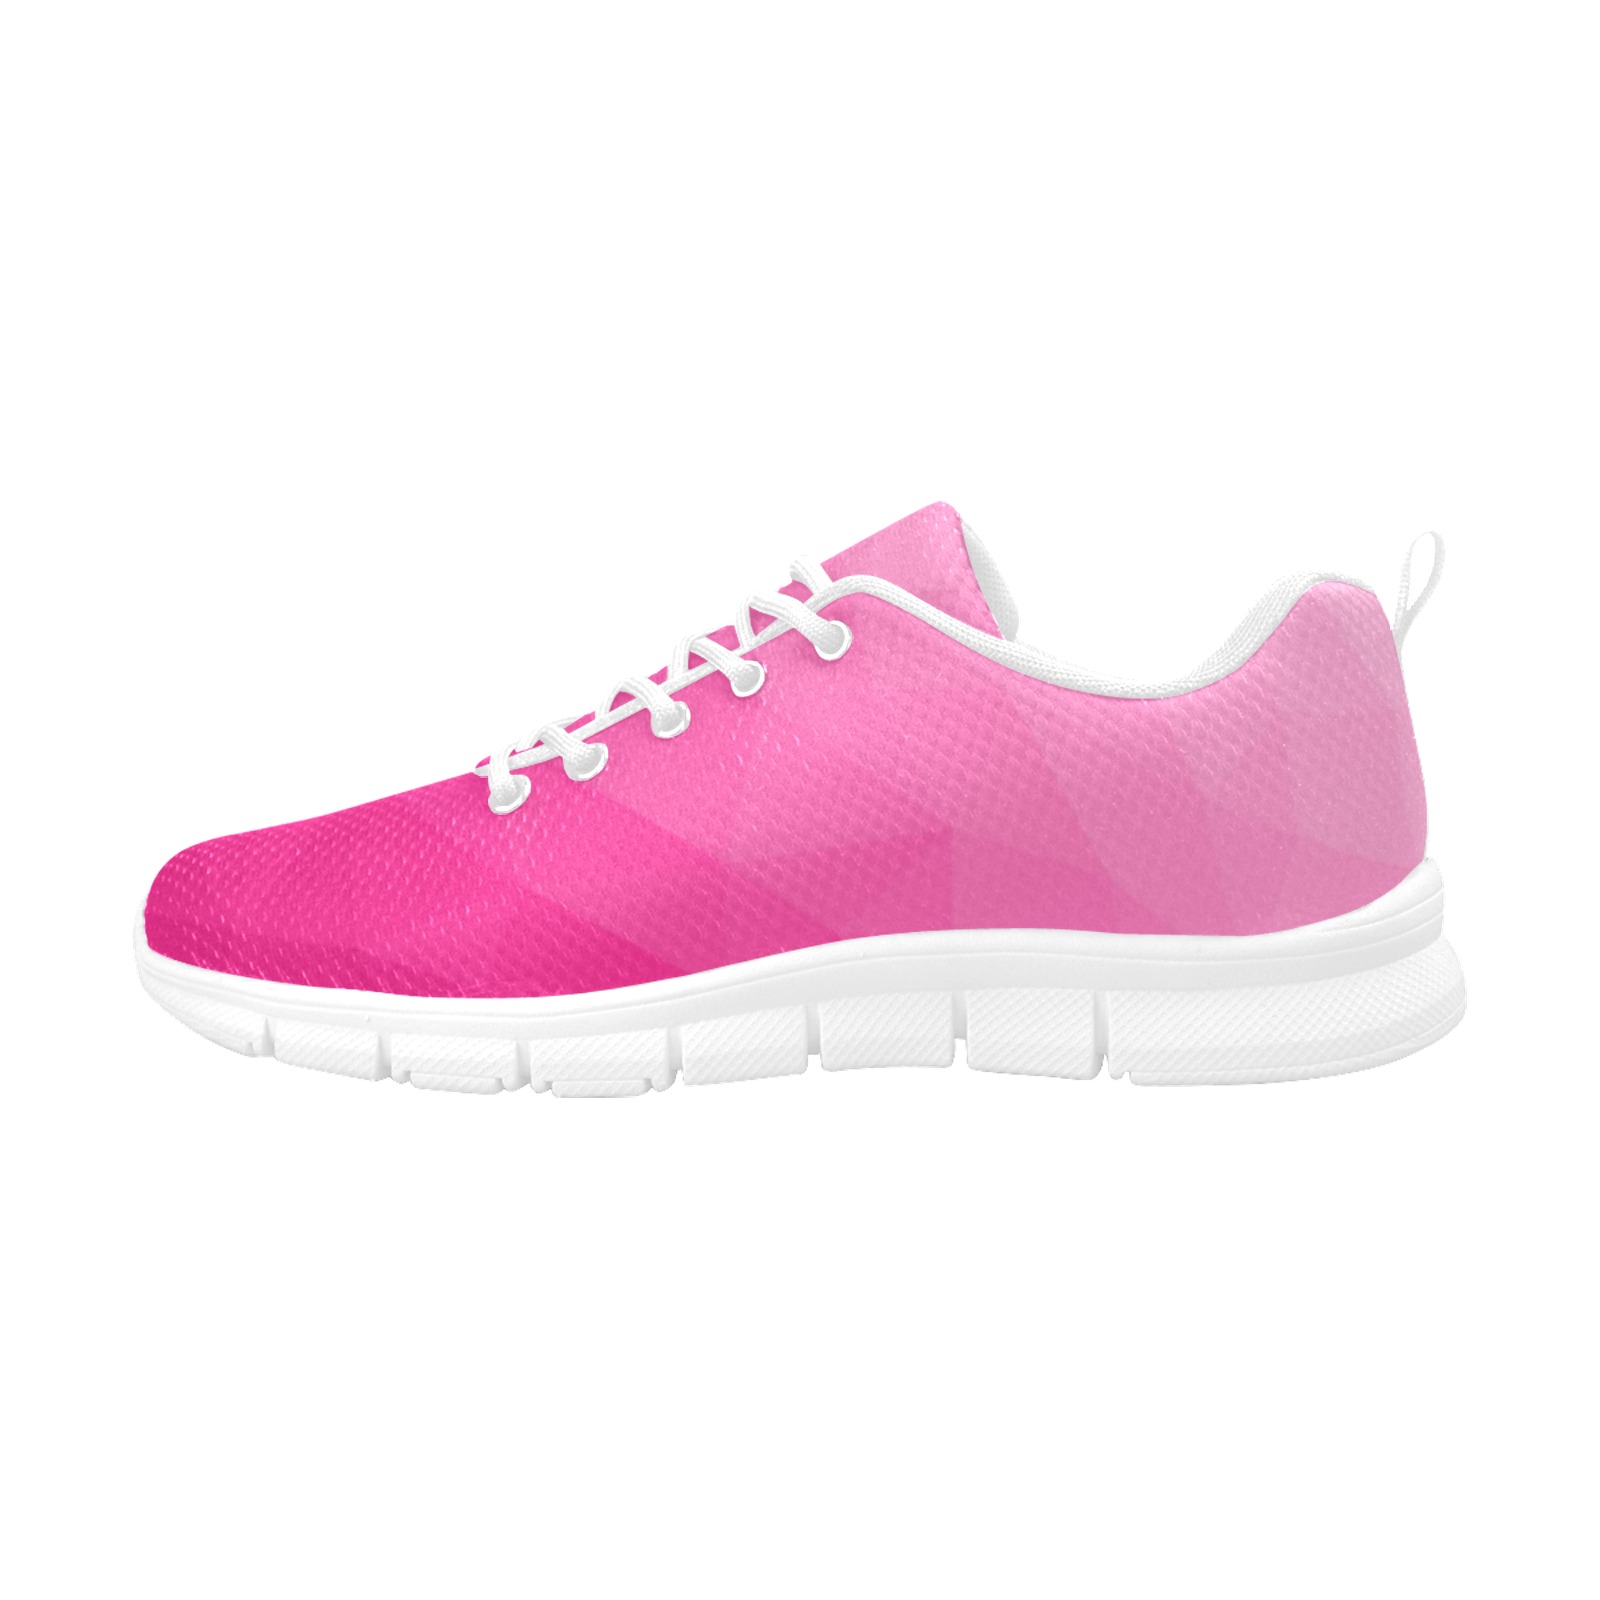 Hot pink gradient geometric mesh pattern Women's Breathable Running Shoes (Model 055)